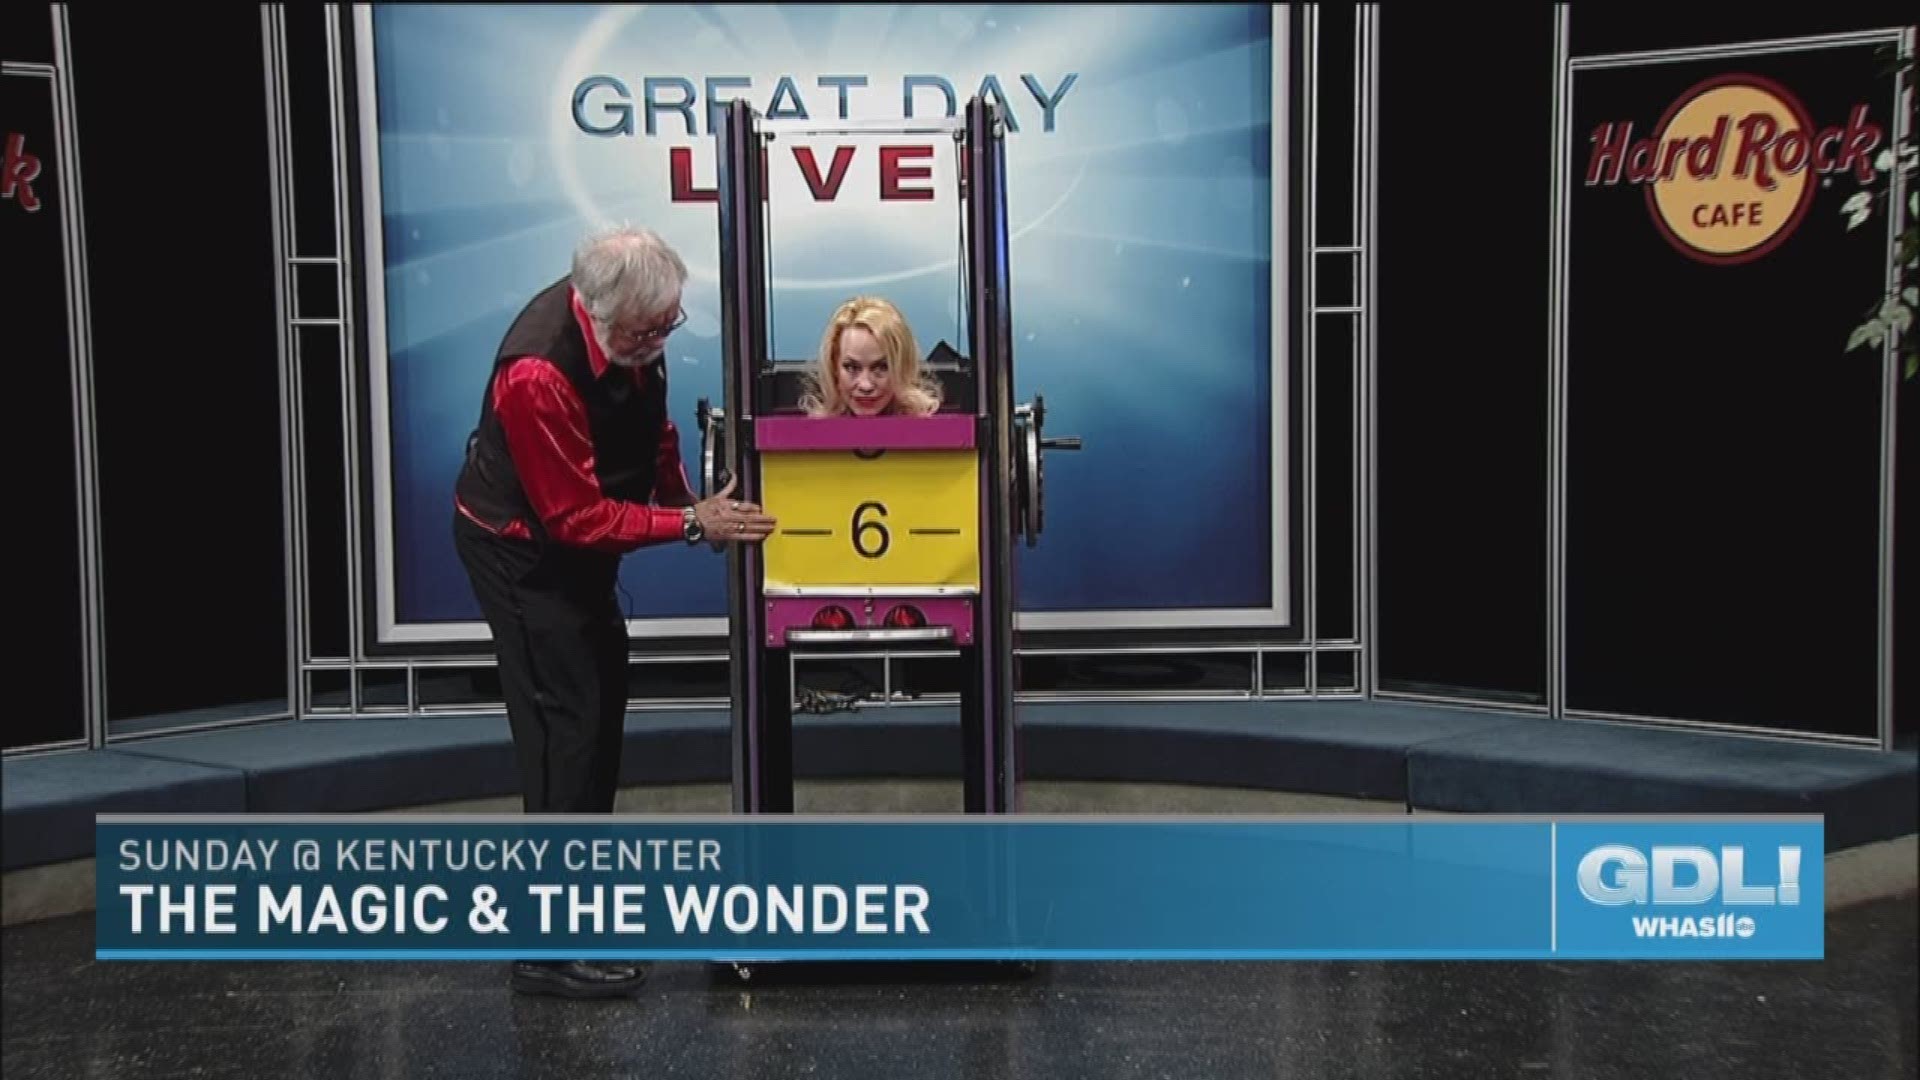 Louisville magician Patrick Miller joins us today in the GDL studio along with his wife to perform an illusion. Patrick organizes The Magic and the Wonder show at The Kentucky Center on Sunday, May 20, 2018.